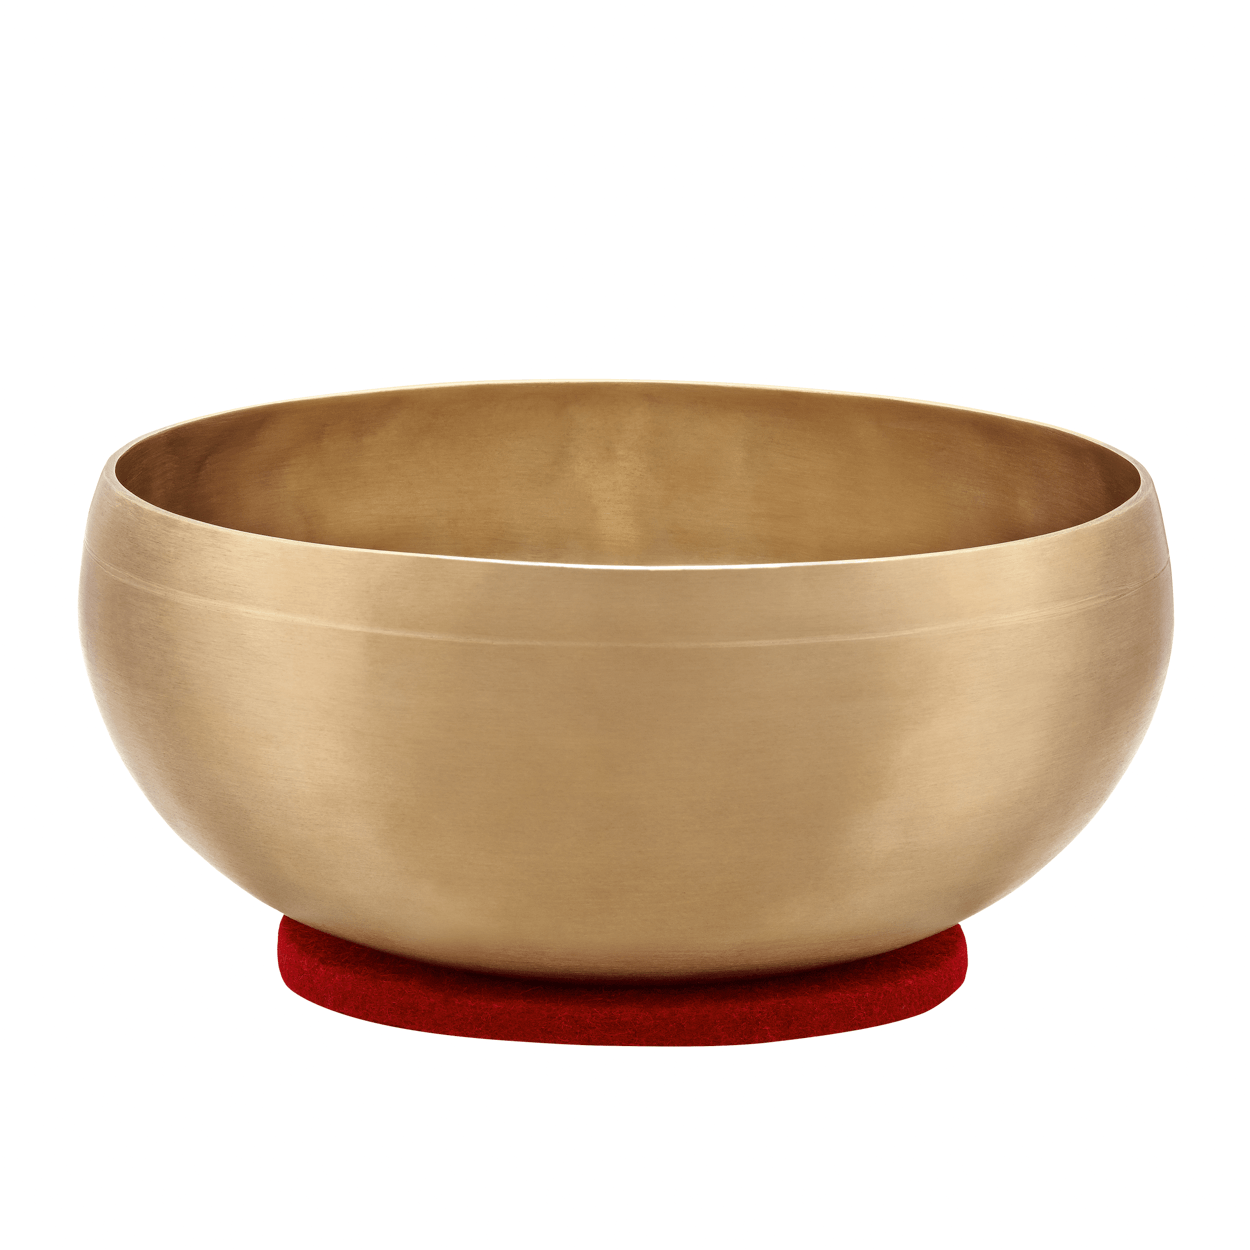 Cosmos Therapy Singing Bowl 9" / 1500g - Cosmos Therapy Singing Bowl